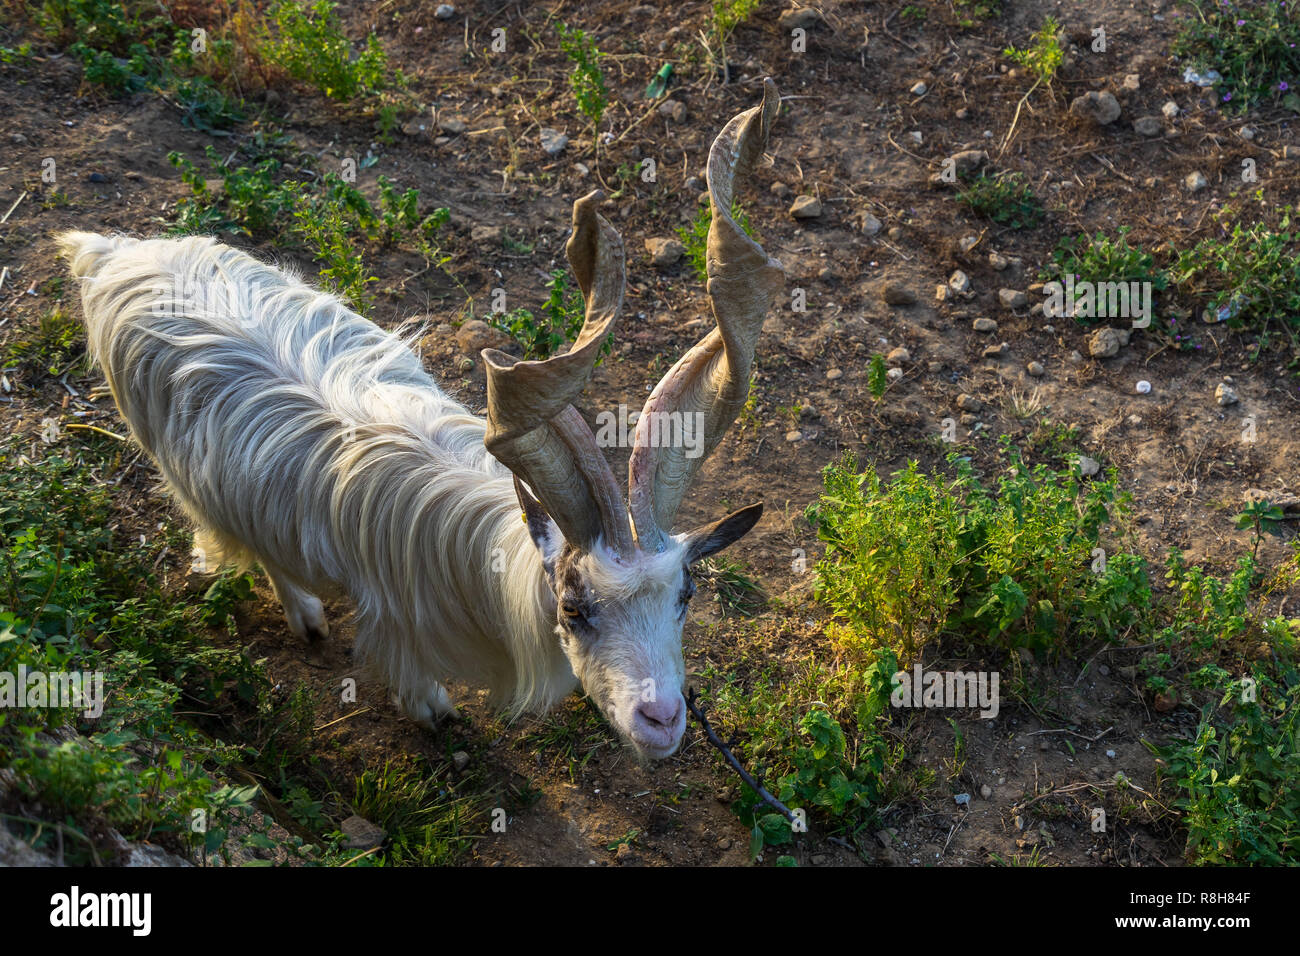 Girgentana (Capra aegagrus hircus) is an indigenous Sicilian goat, here at Valle dei Templi (Valley of the Temples), Agrigento, Sicily, Italy Stock Photo